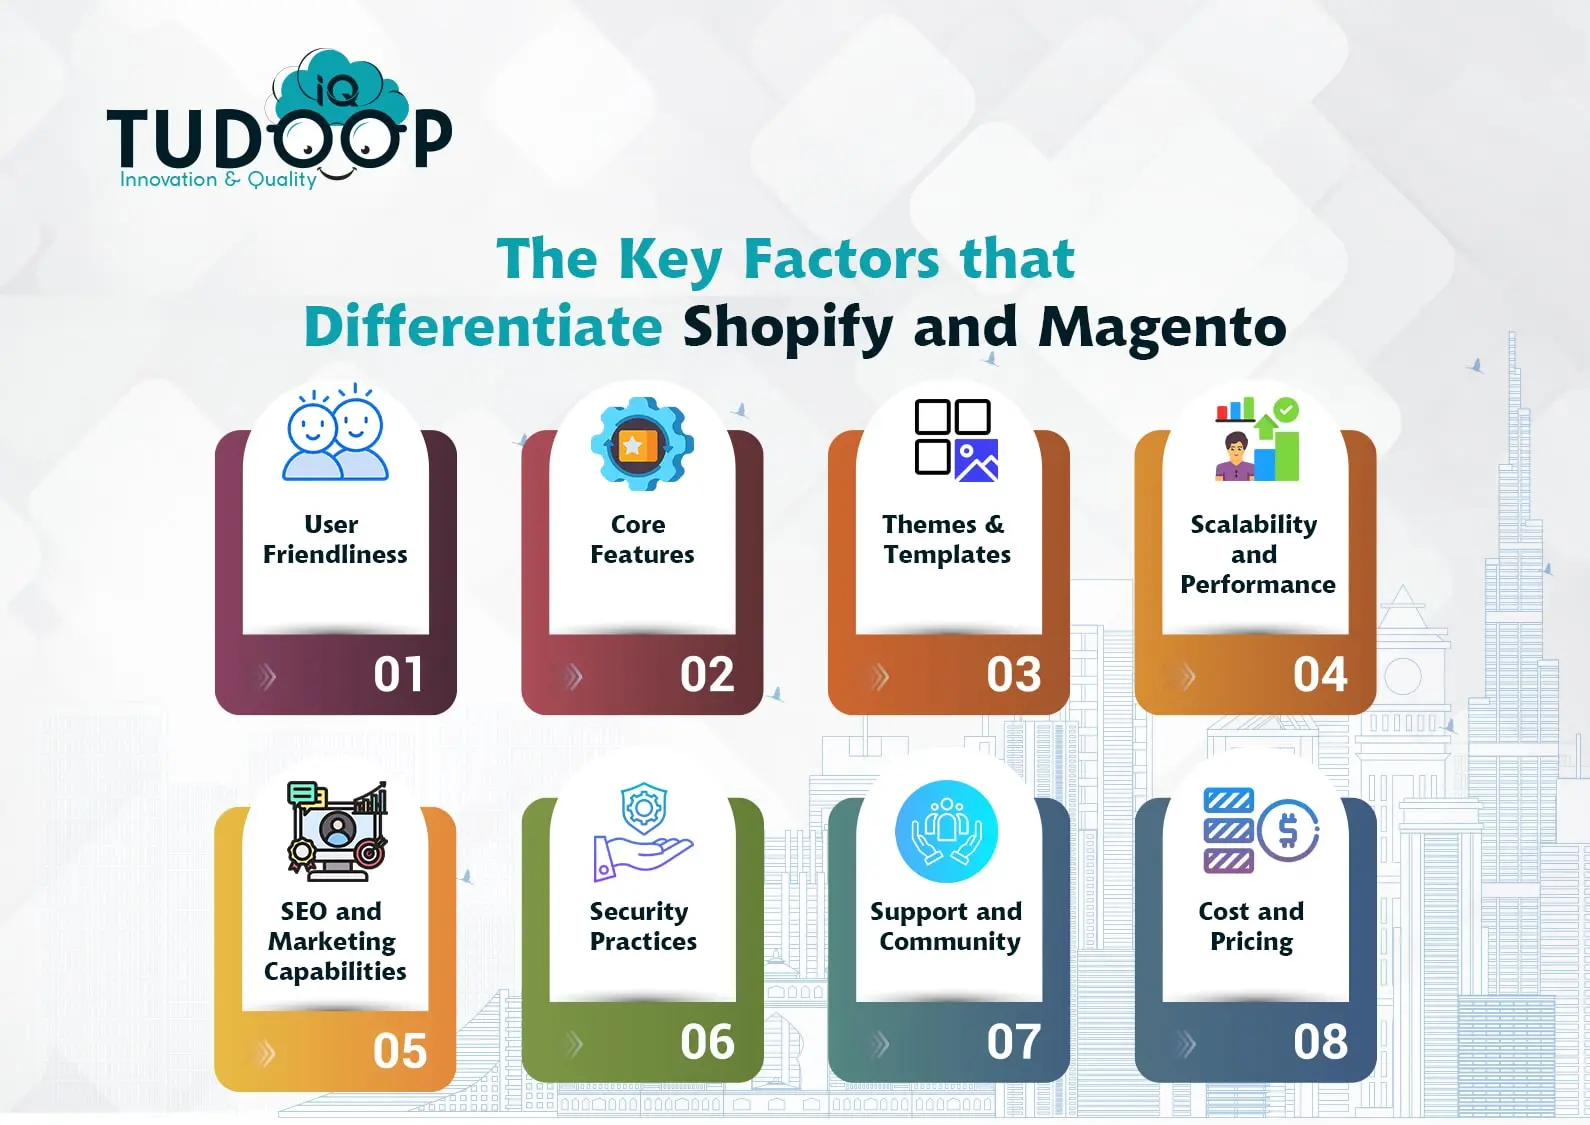 Key Factors that Differentiate Shopify and Magento